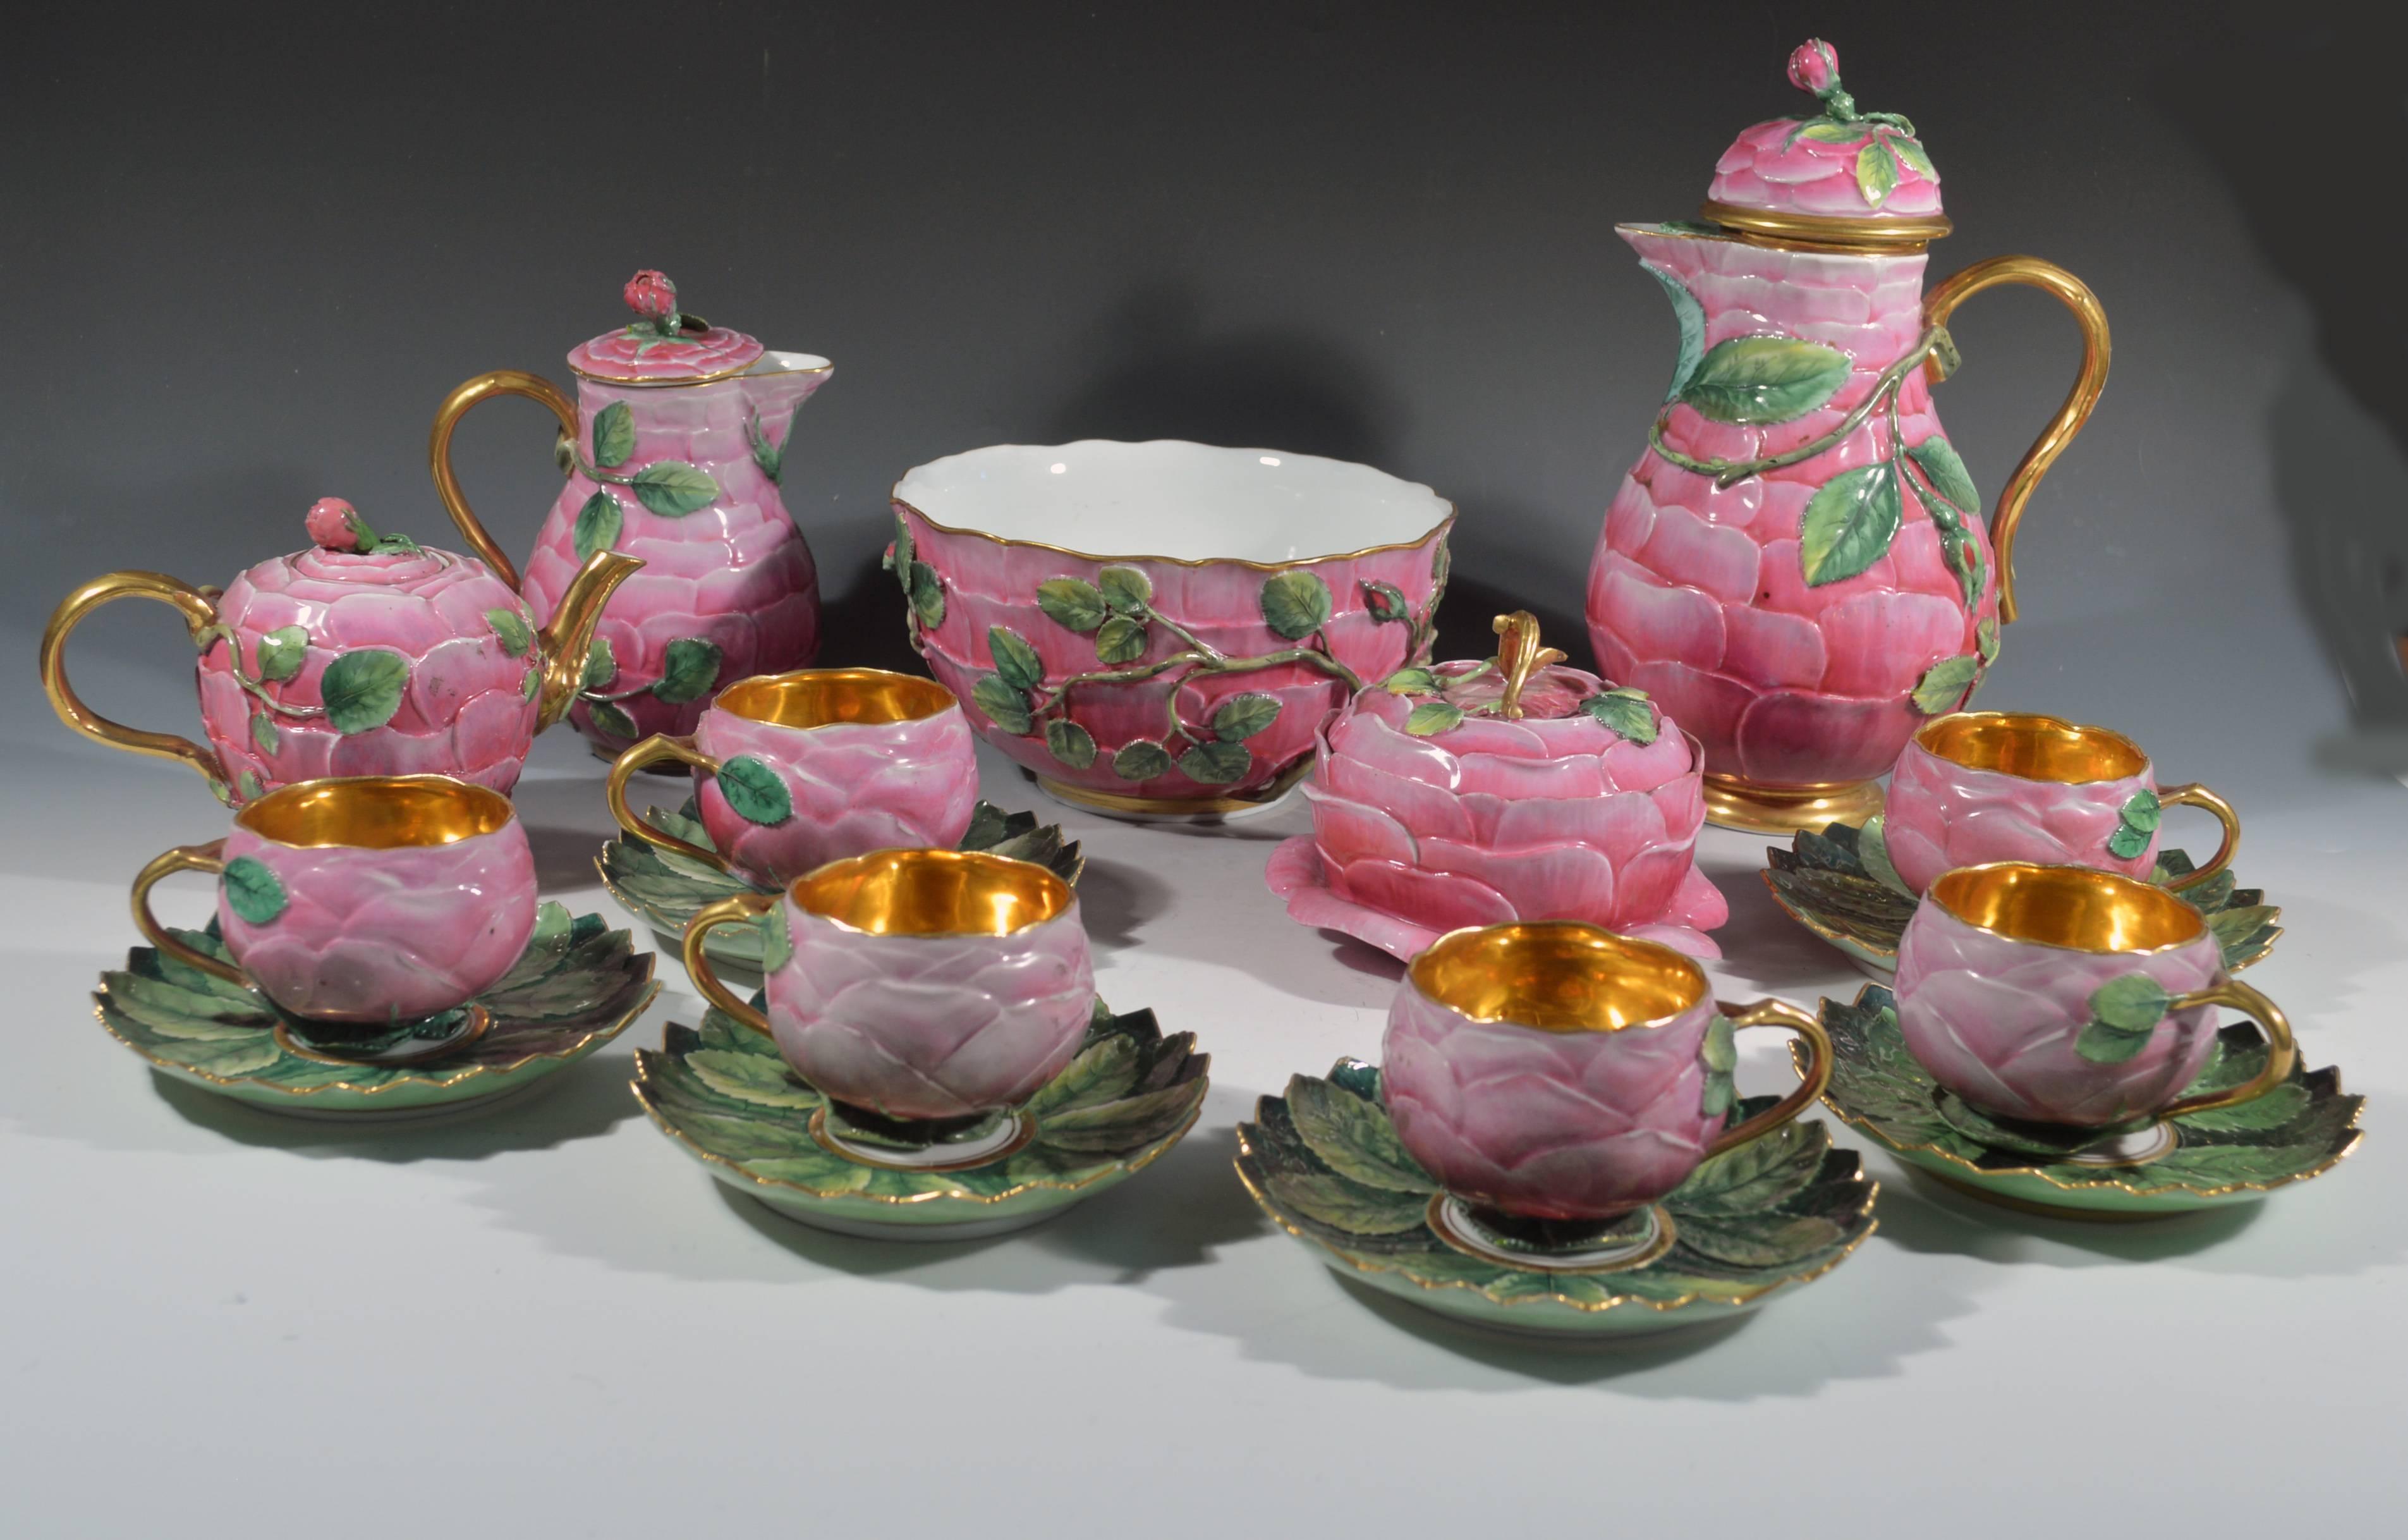 German porcelain Trompe L'oeil rose tea service,
19th century.

The tea service comprises of a hot water pot and cover, a teapot and cover, a hot milk jug and cover, a sugar bowl and cover and six cups and saucers with gilded interiors.